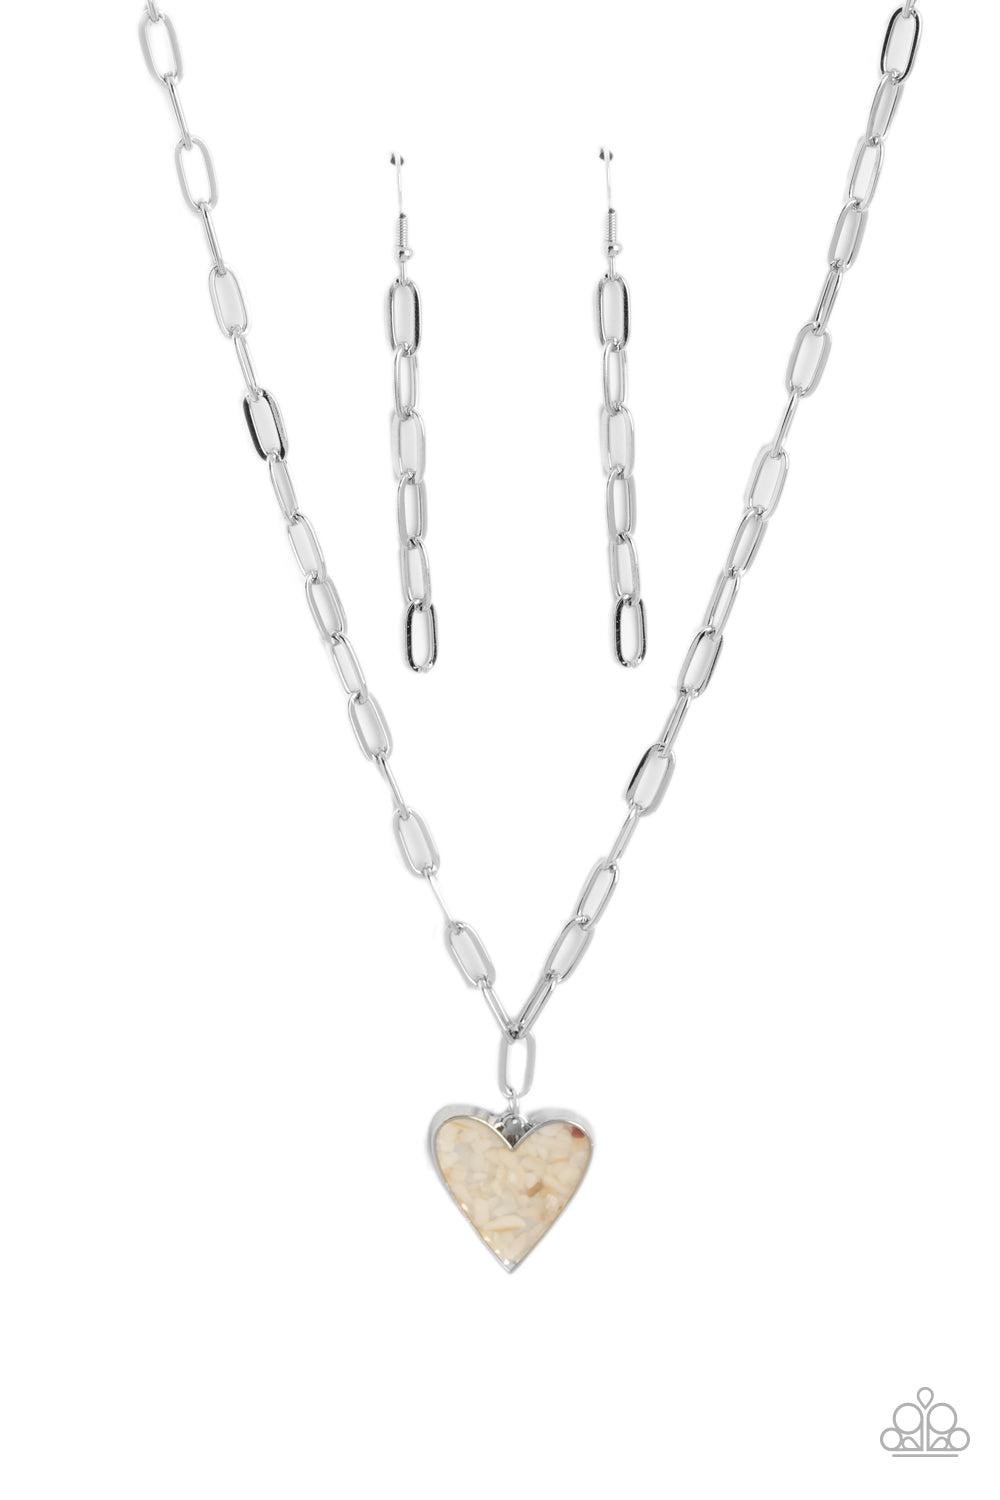 Kiss and SHELL White Heart Necklace - Paparazzi Accessories- lightbox - CarasShop.com - $5 Jewelry by Cara Jewels